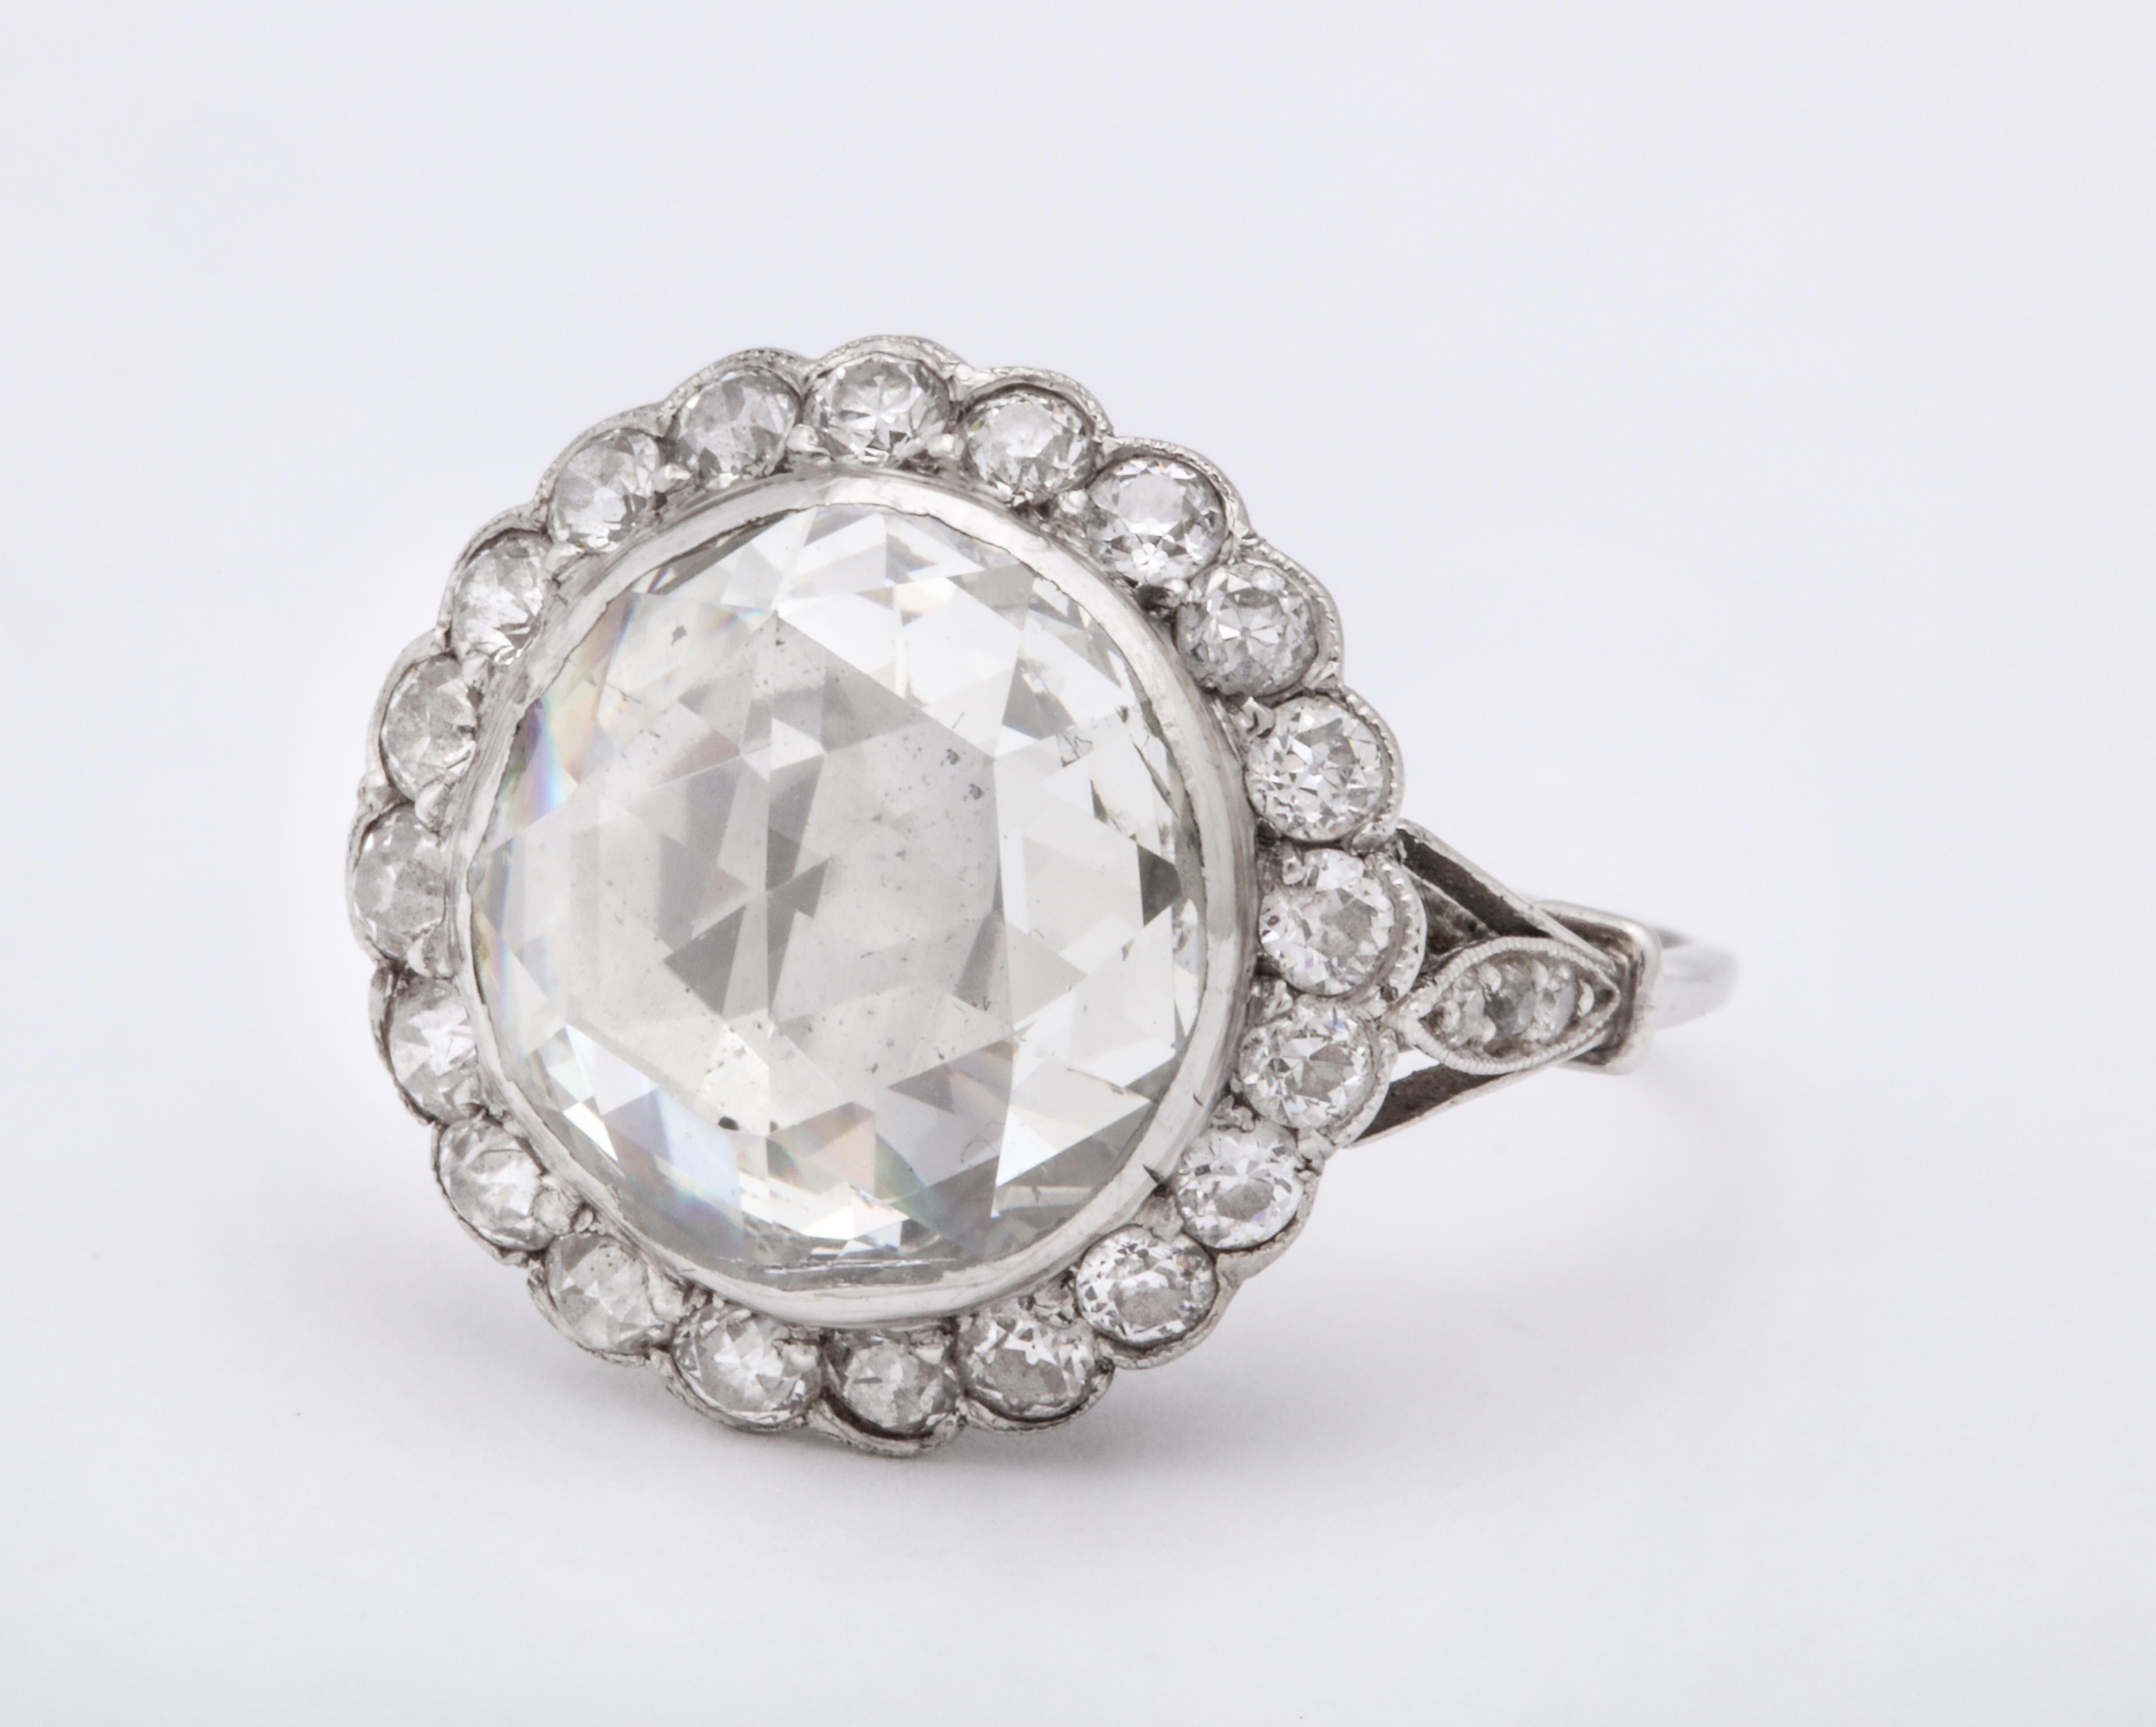 This is an exceptional Vintage rose diamond ring has a large center diamond which measures 6.5 carats but for appraisal qualification is diminished because of the flat cullet .  It is a stunning diamond  foil-backed with surrounding rose cuts in a